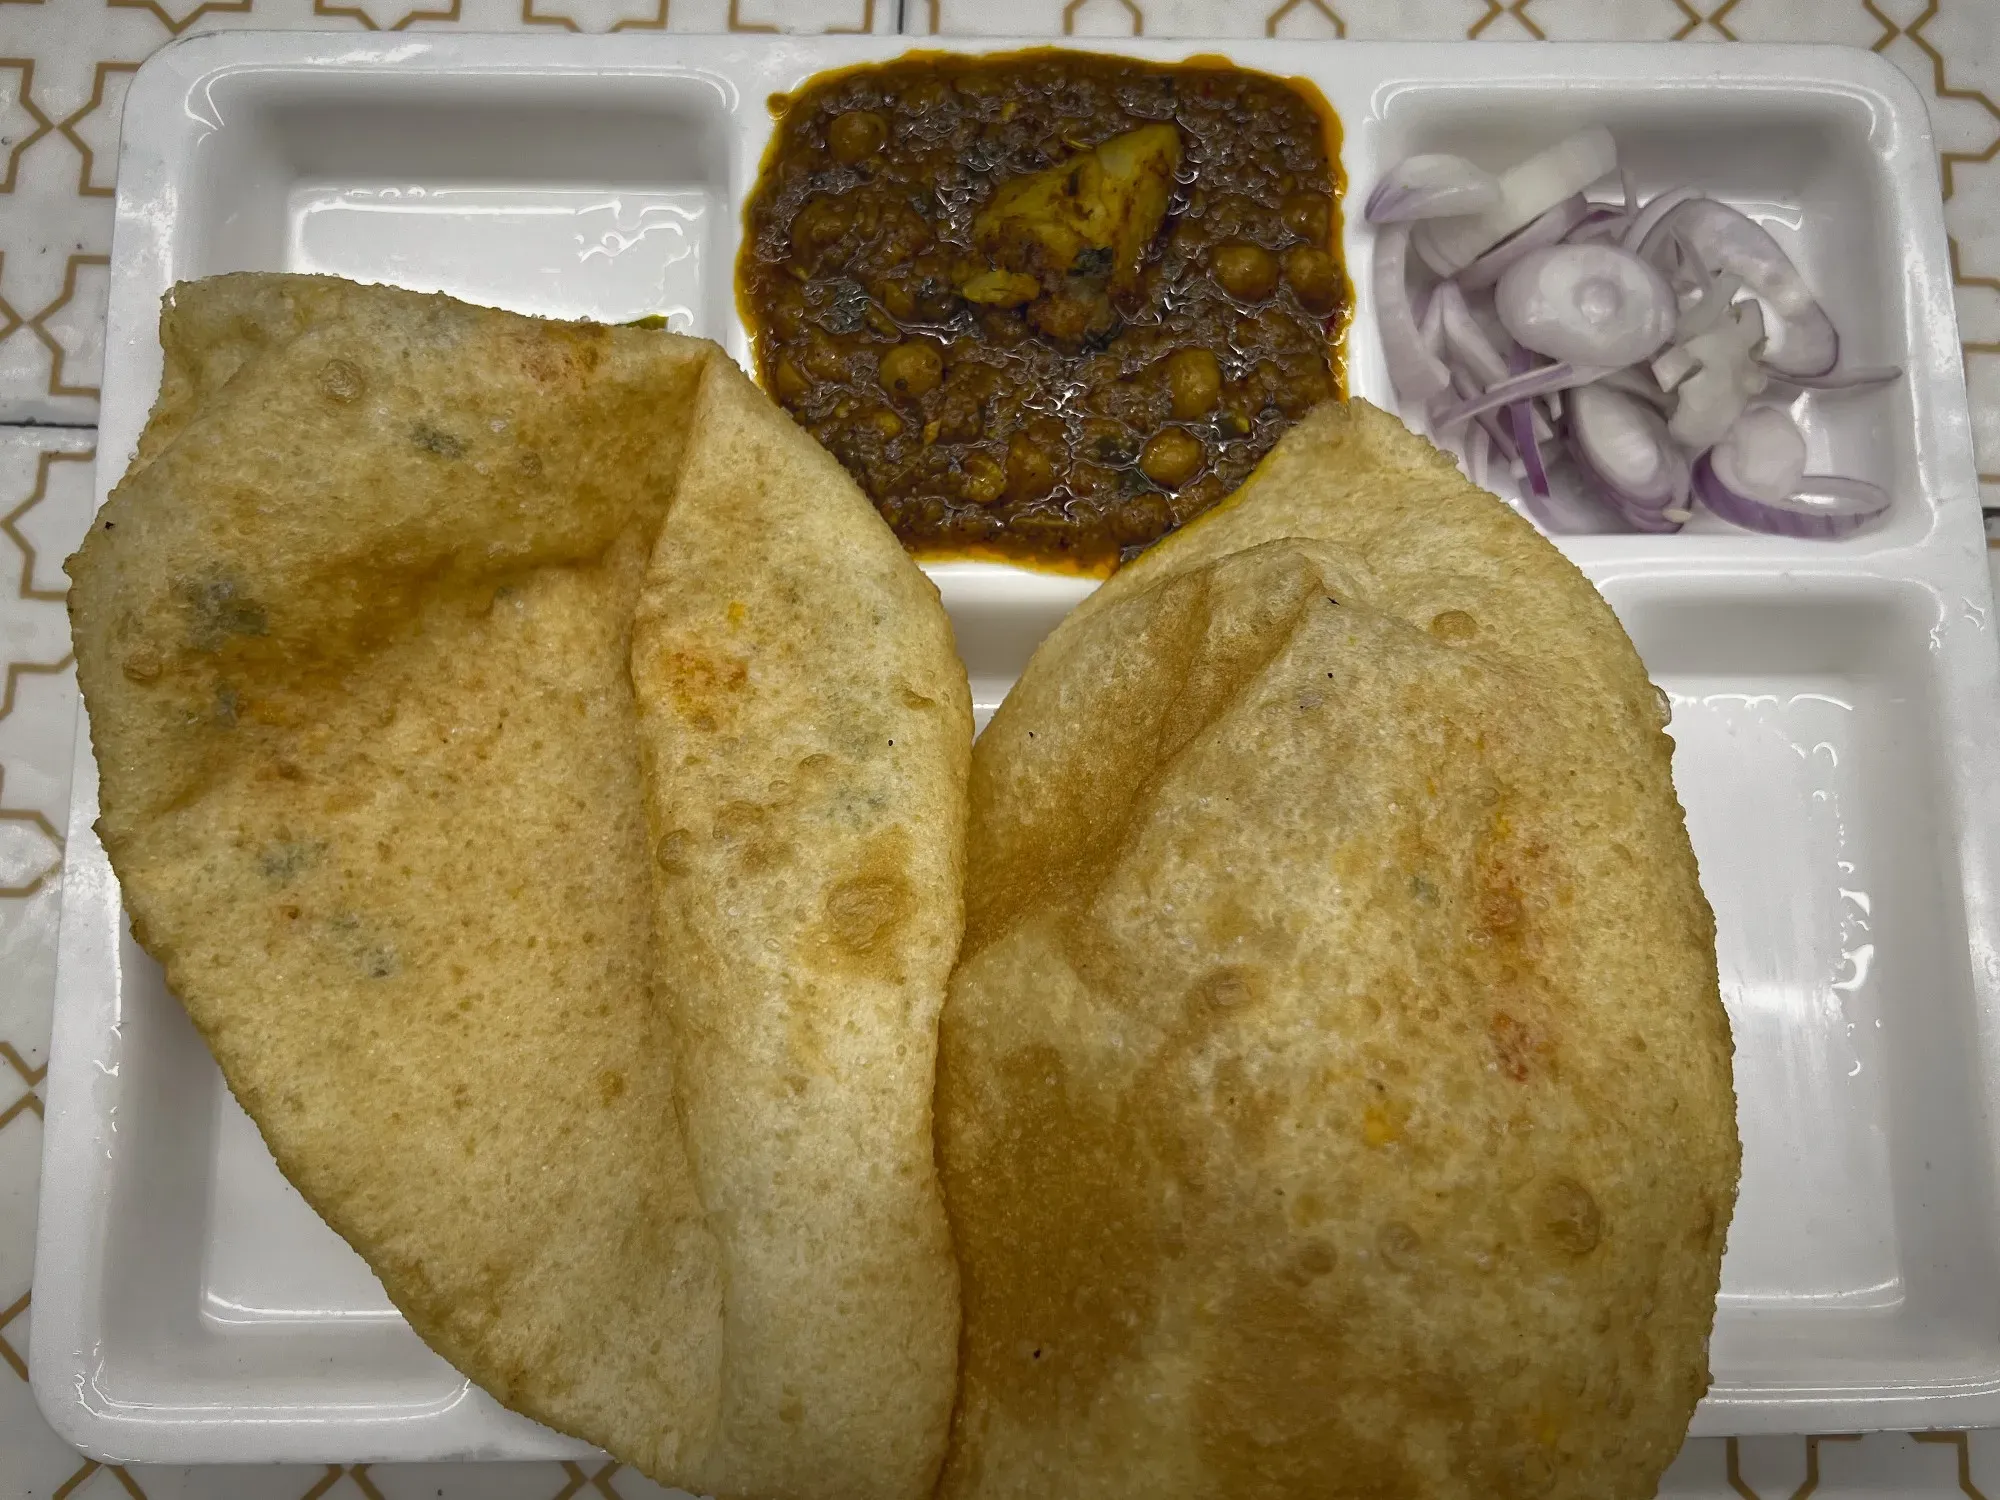 Tray with two large Bhature and a serving of Chole "curry", overhead shot.